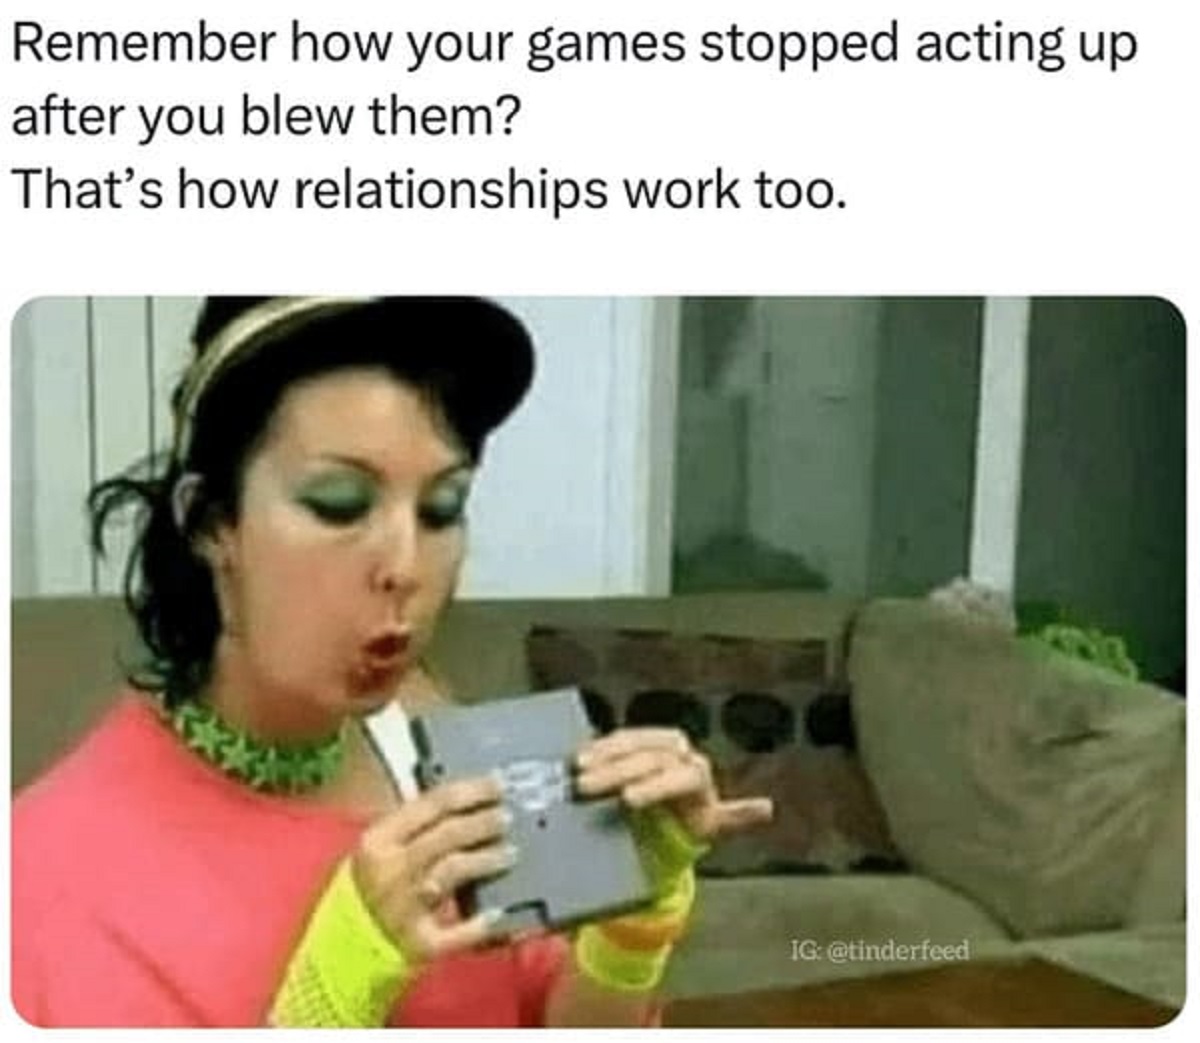 spicy memes -  media - Remember how your games stopped acting up after you blew them? That's how relationships work too. Ig